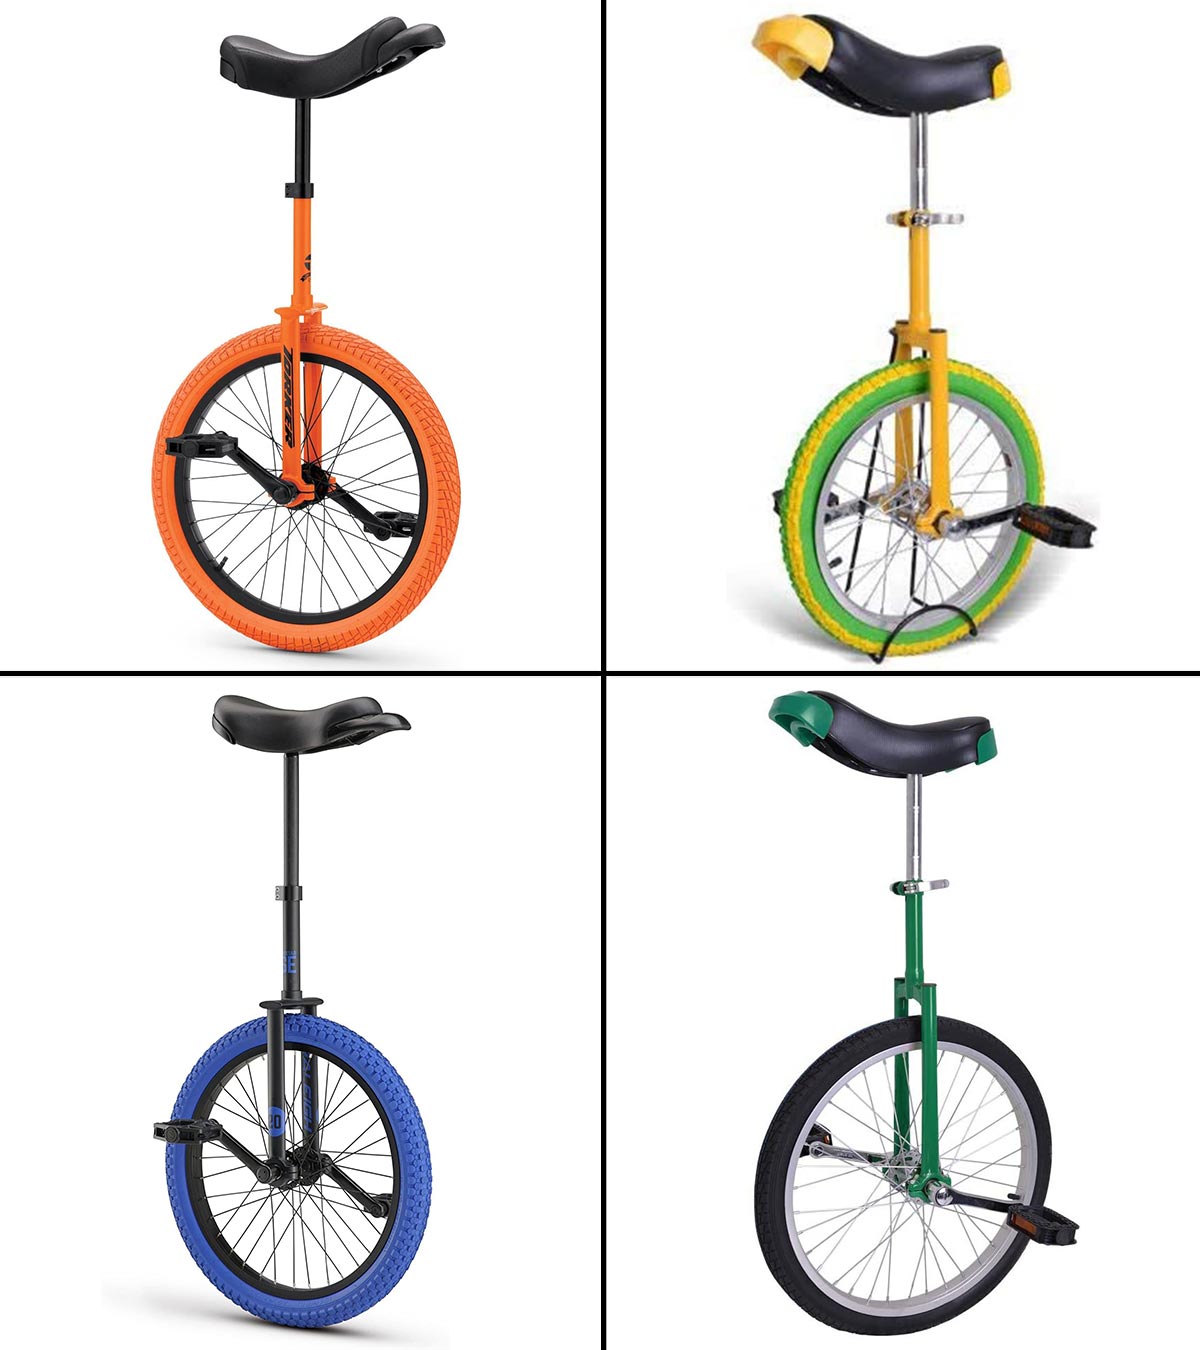 Details about   20" Blue Unicycle Cycling Scooter Circus Bike Skidproof Tire Balance Exercise 